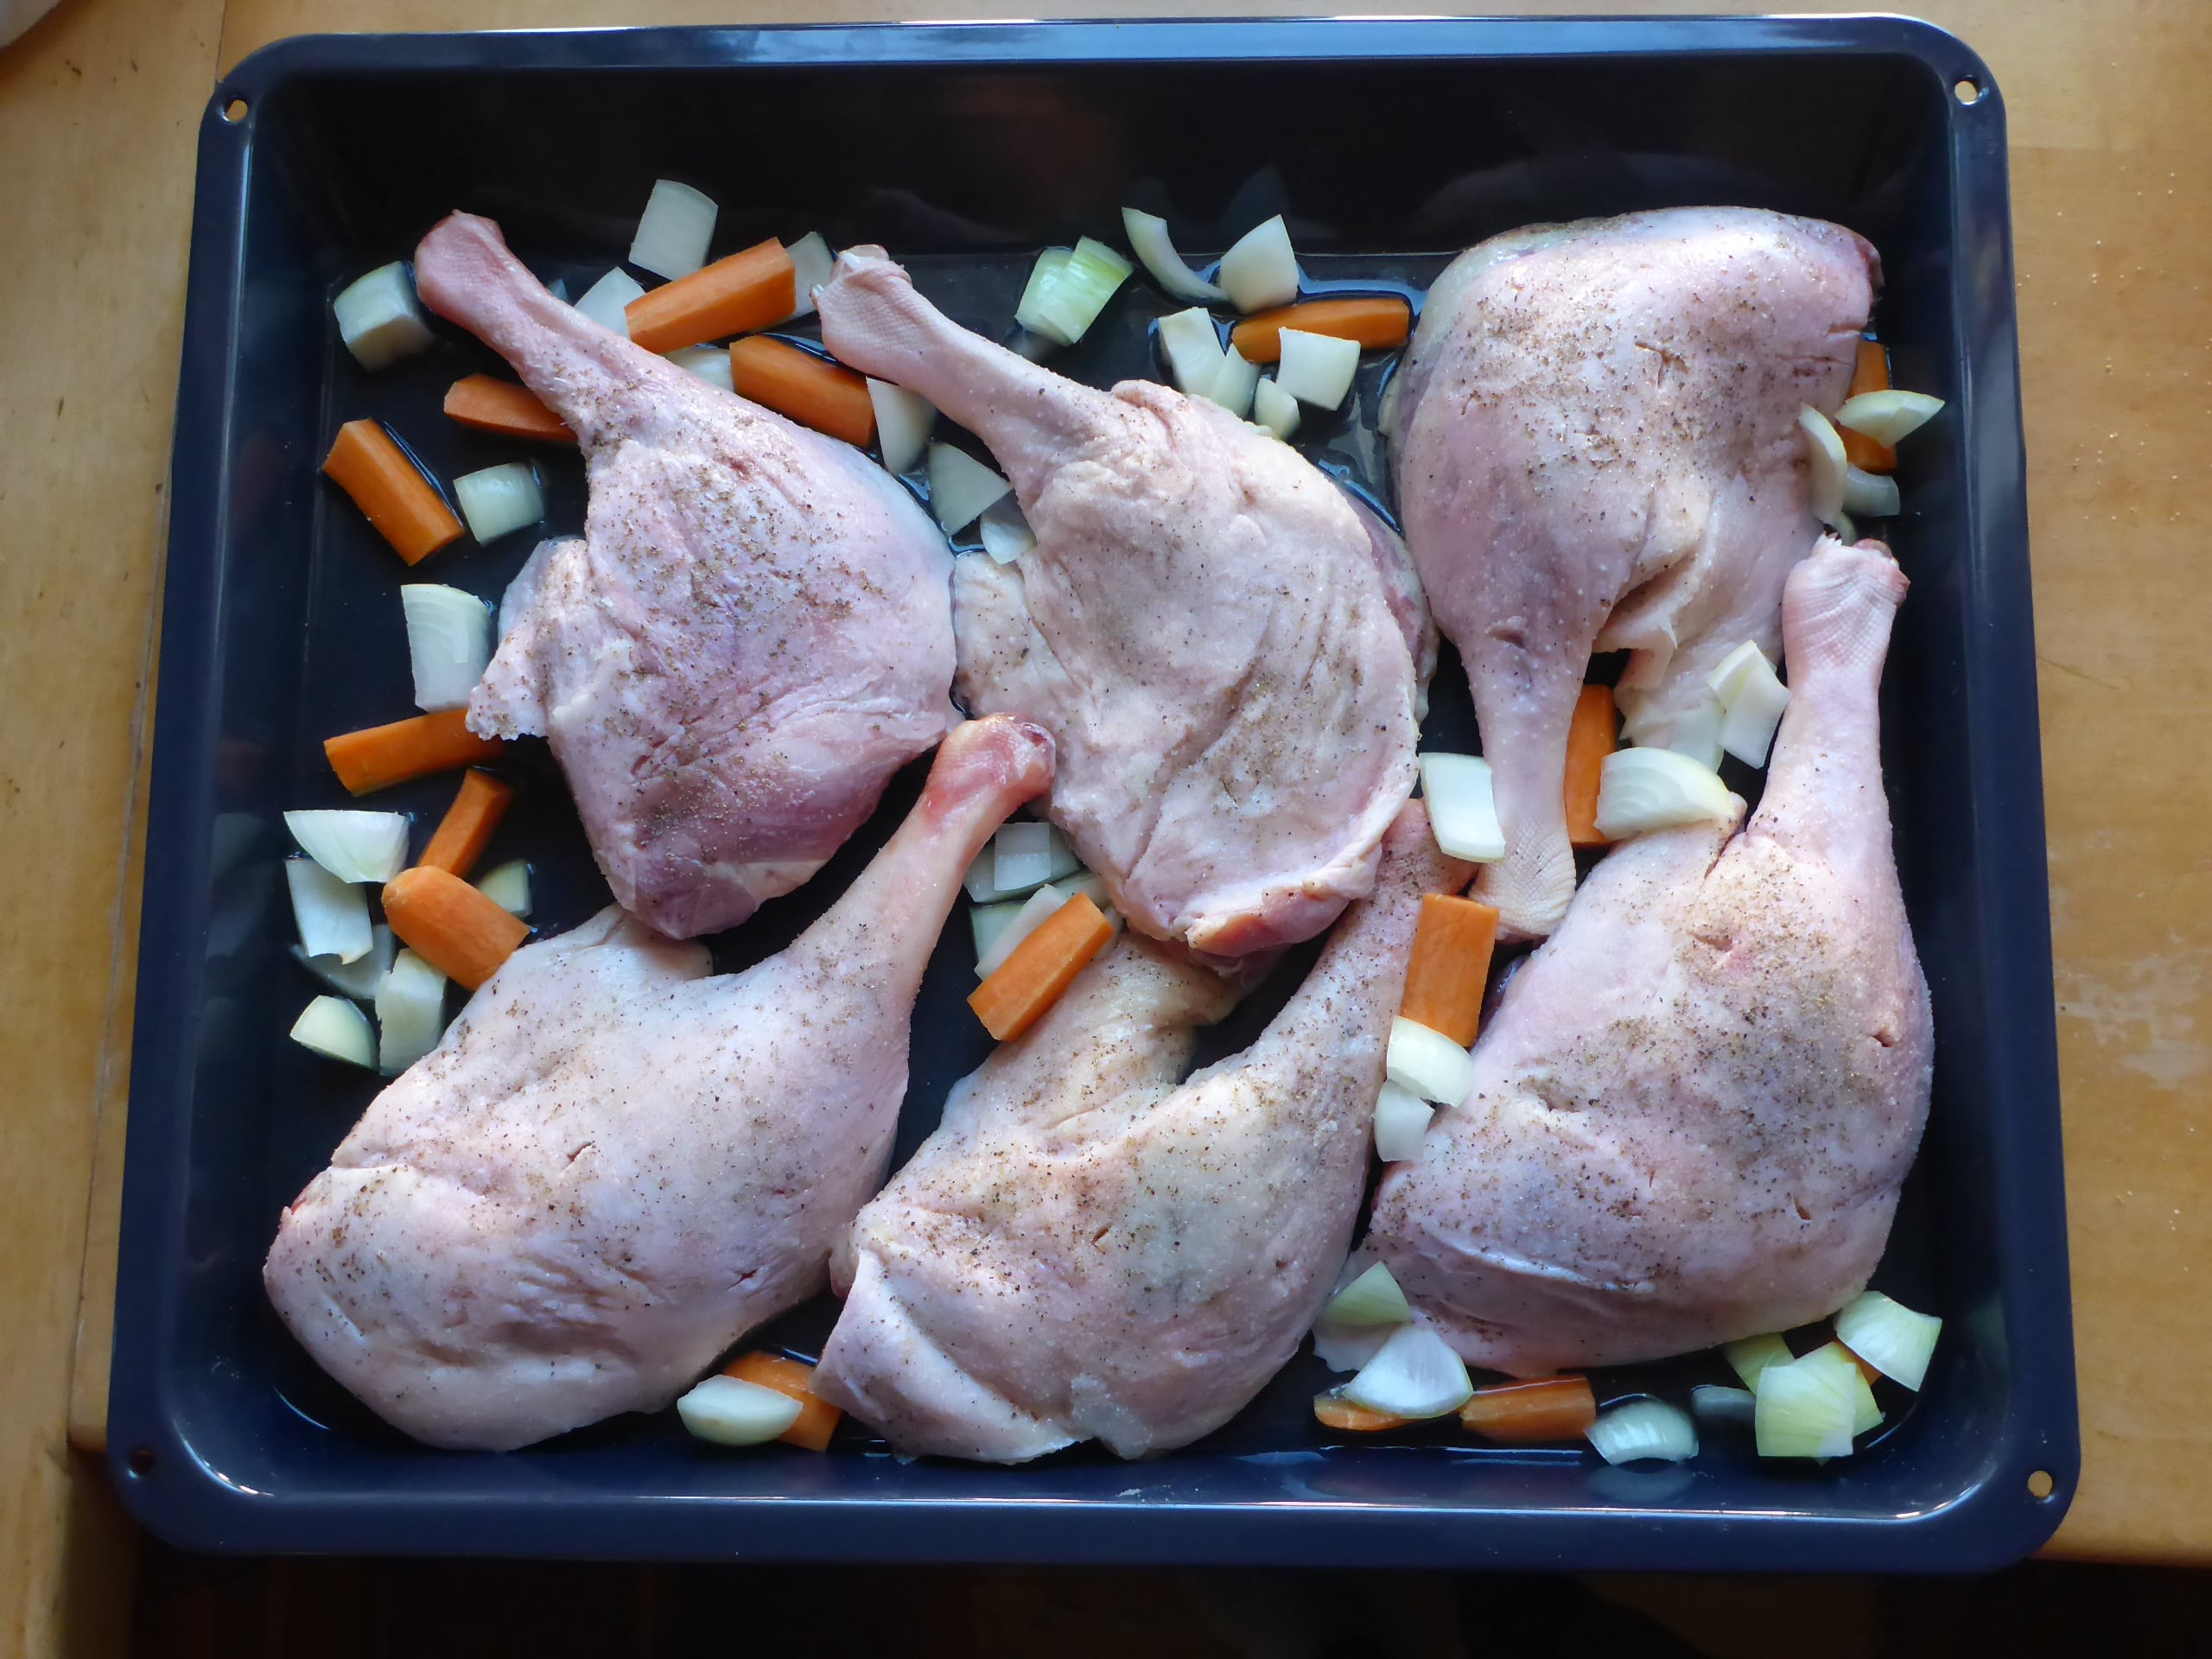 Goose legs on a baking sheet surrounded by small pieces of carrots and onions, ready to be placed in the oven for roasting.